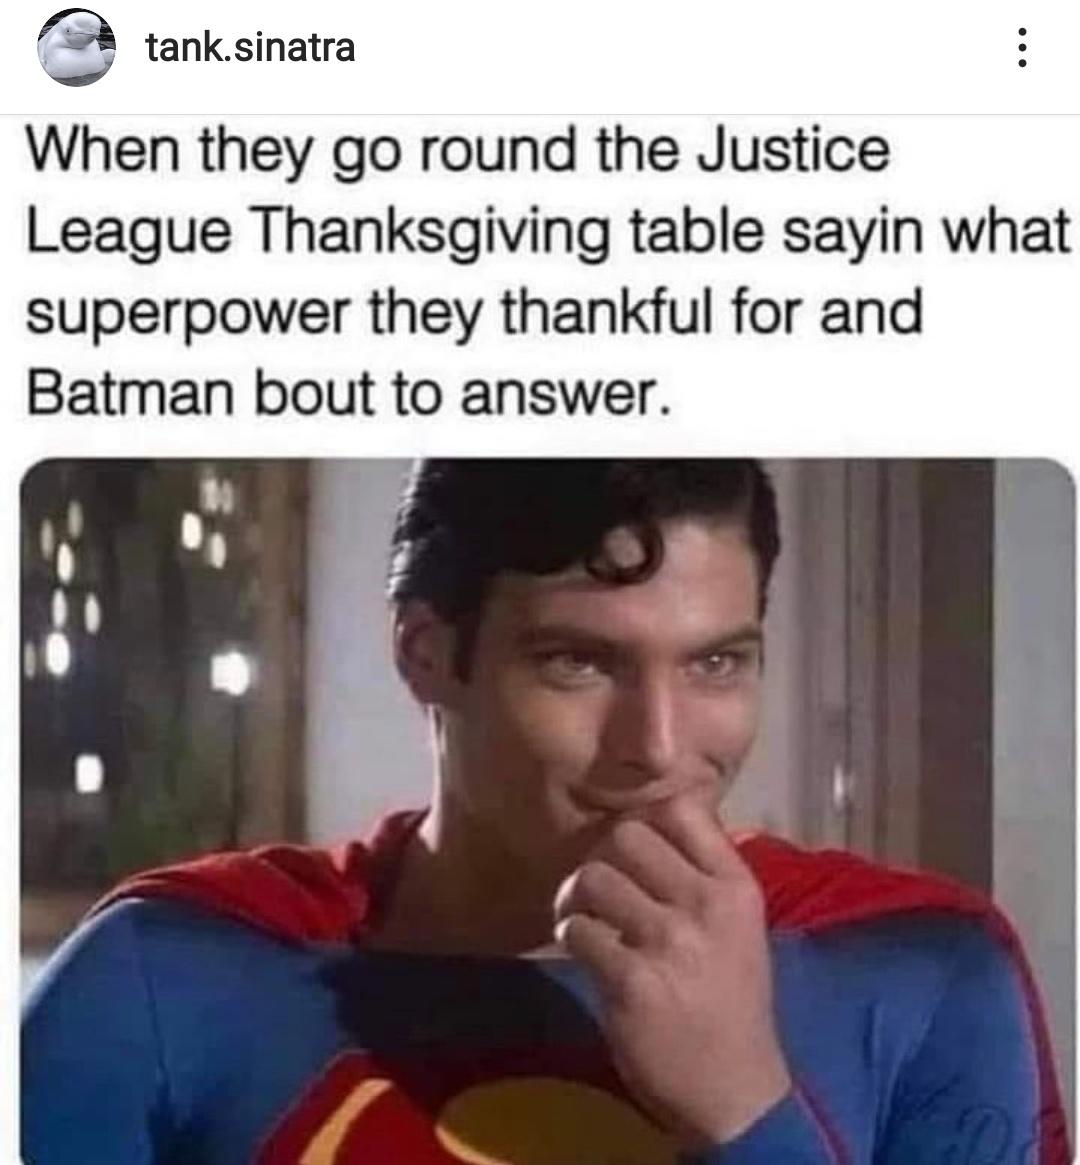 innovation quotes - tank.sinatra When they go round the Justice League Thanksgiving table sayin what superpower they thankful for and Batman bout to answer.